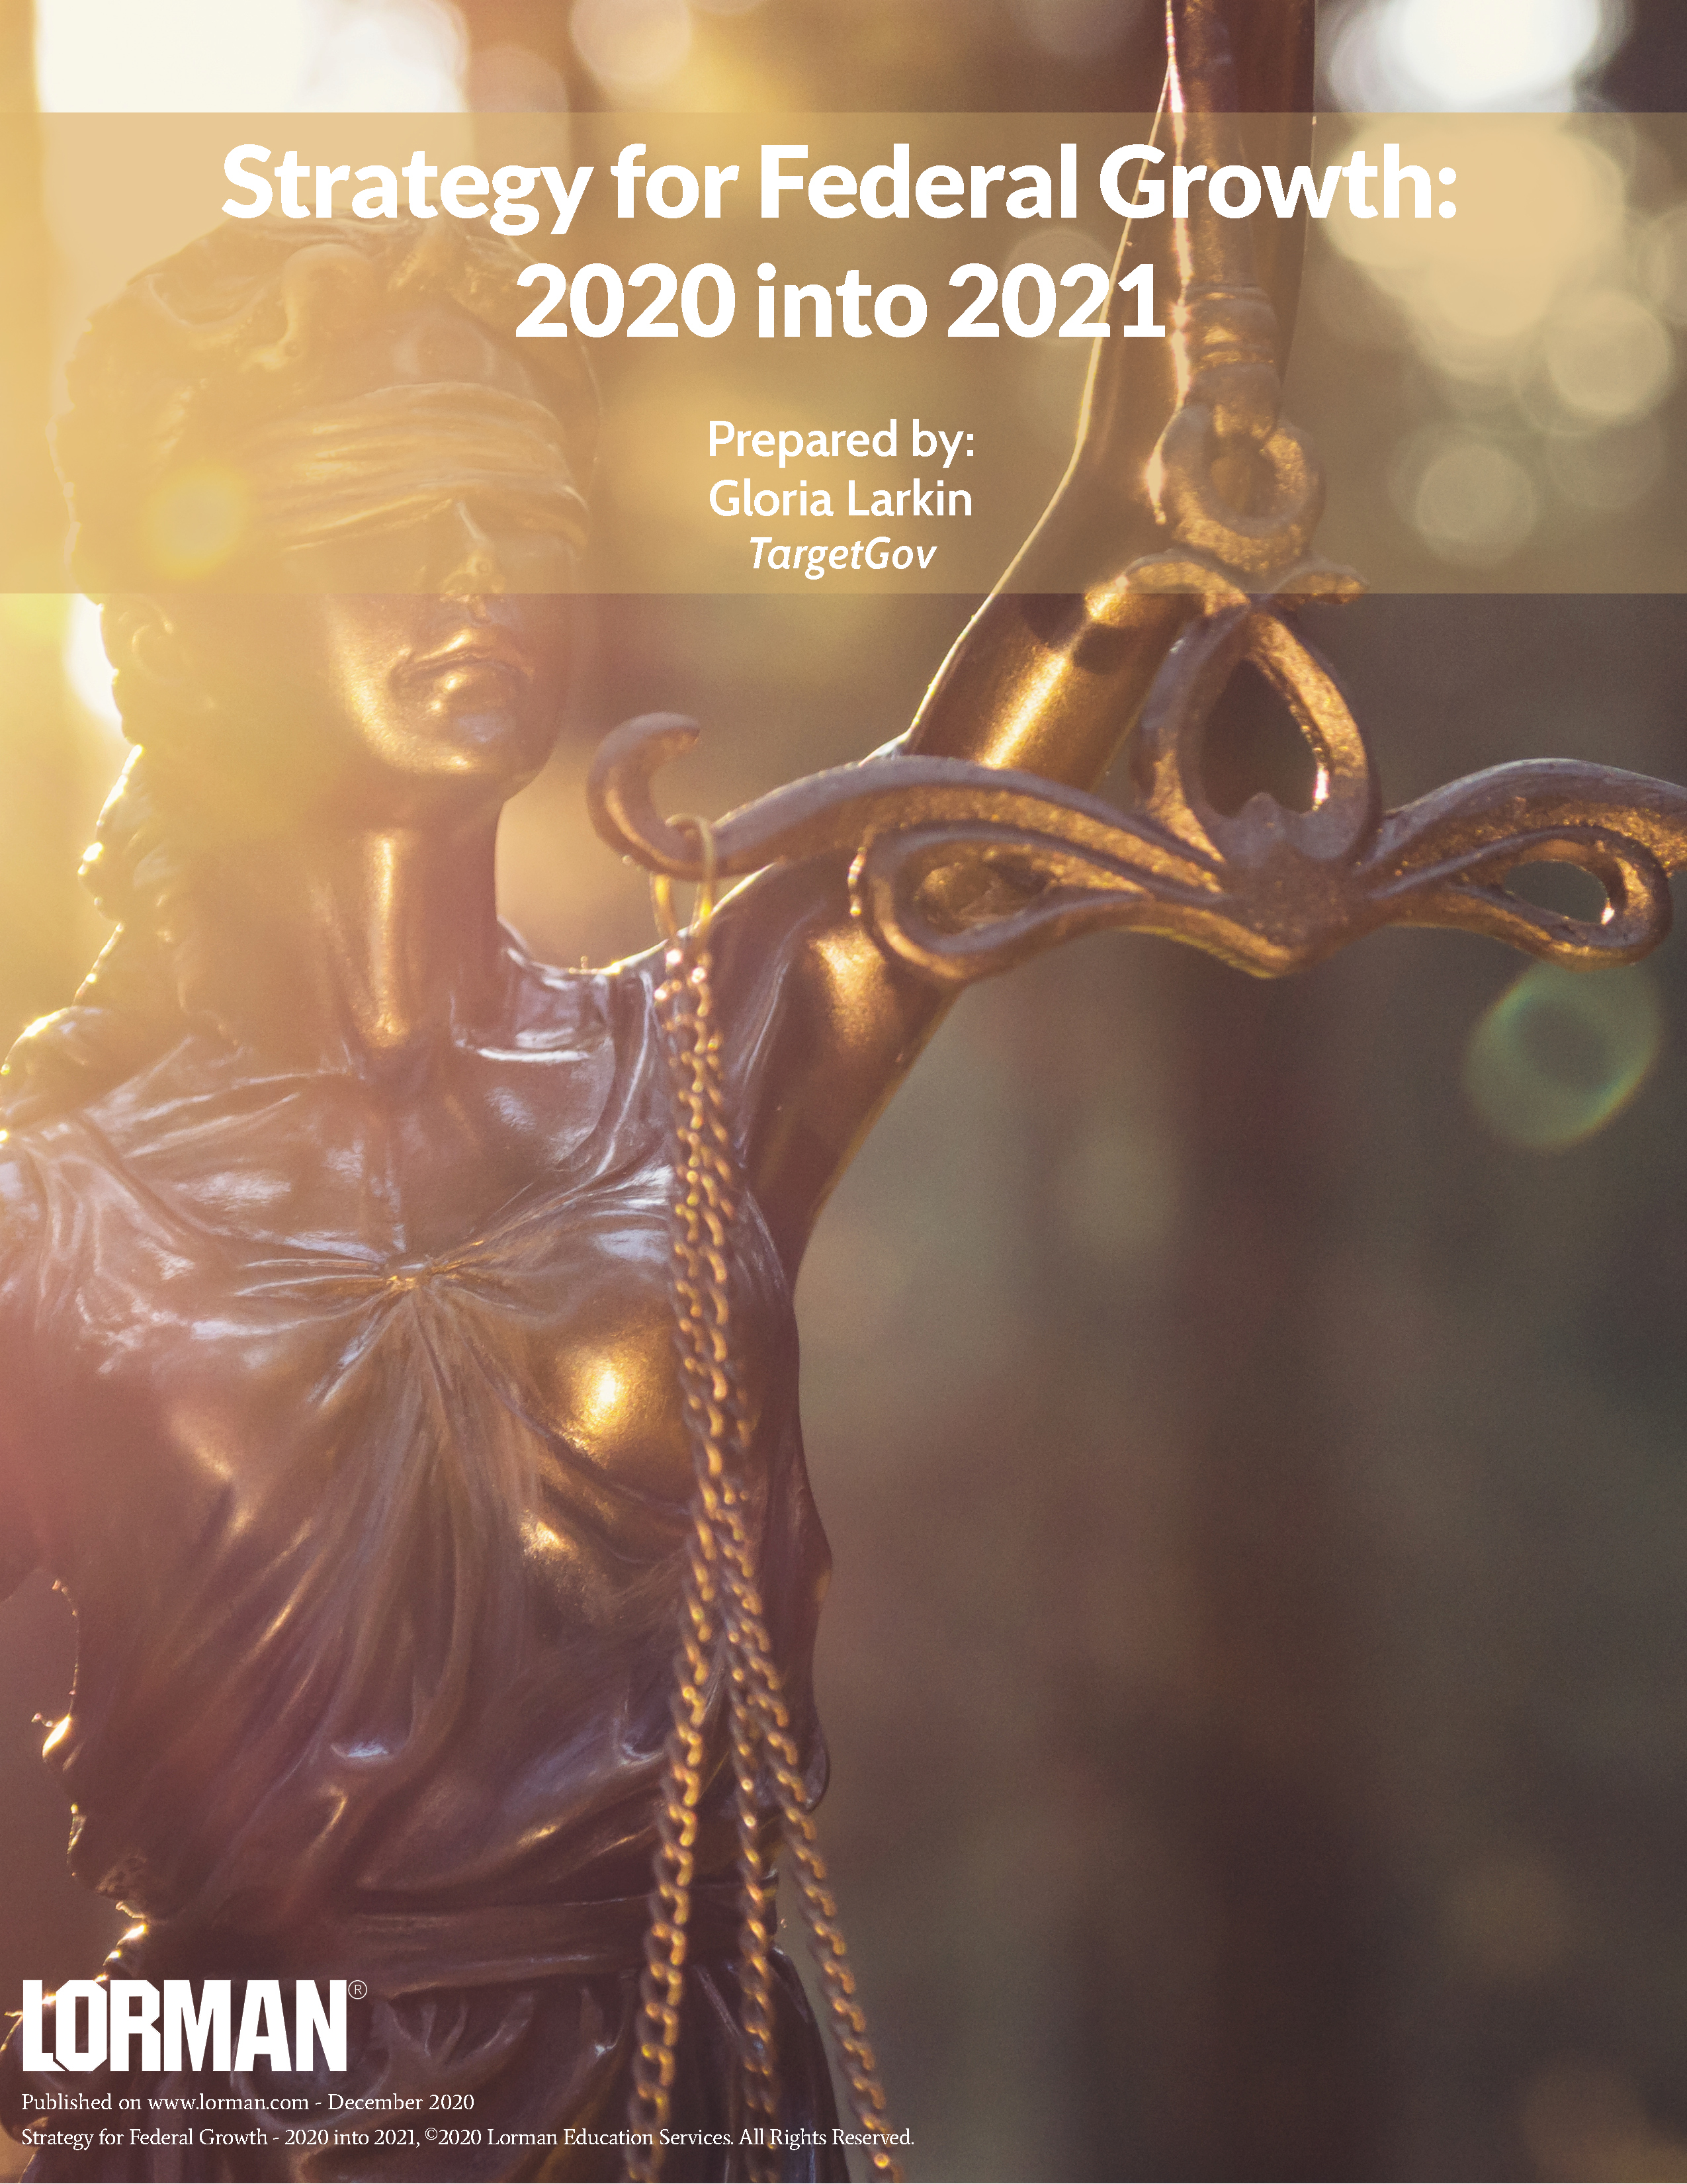 Strategy for Federal Growth - 2020 into 2021